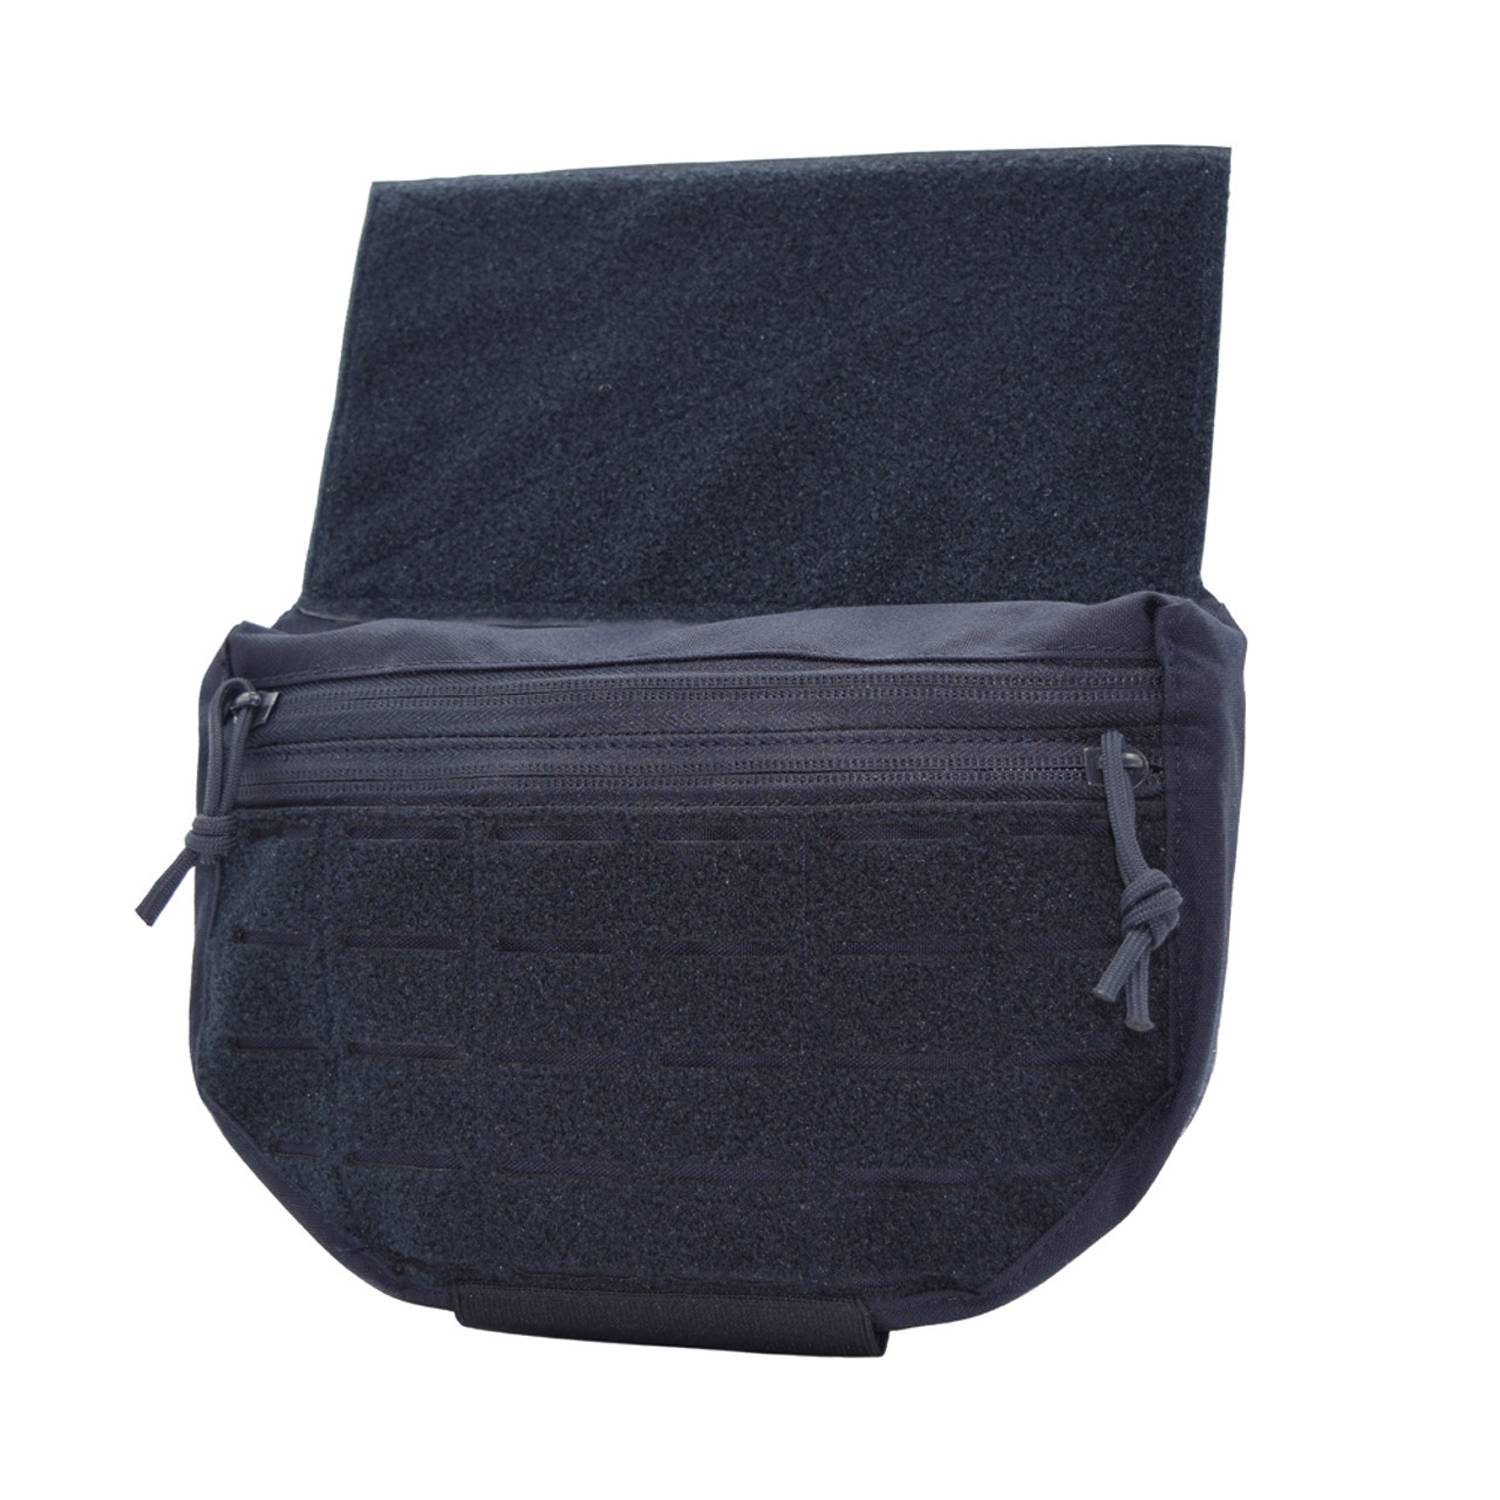 SHELLBACK TACTICAL FLAP SAC 2.0 POUCH